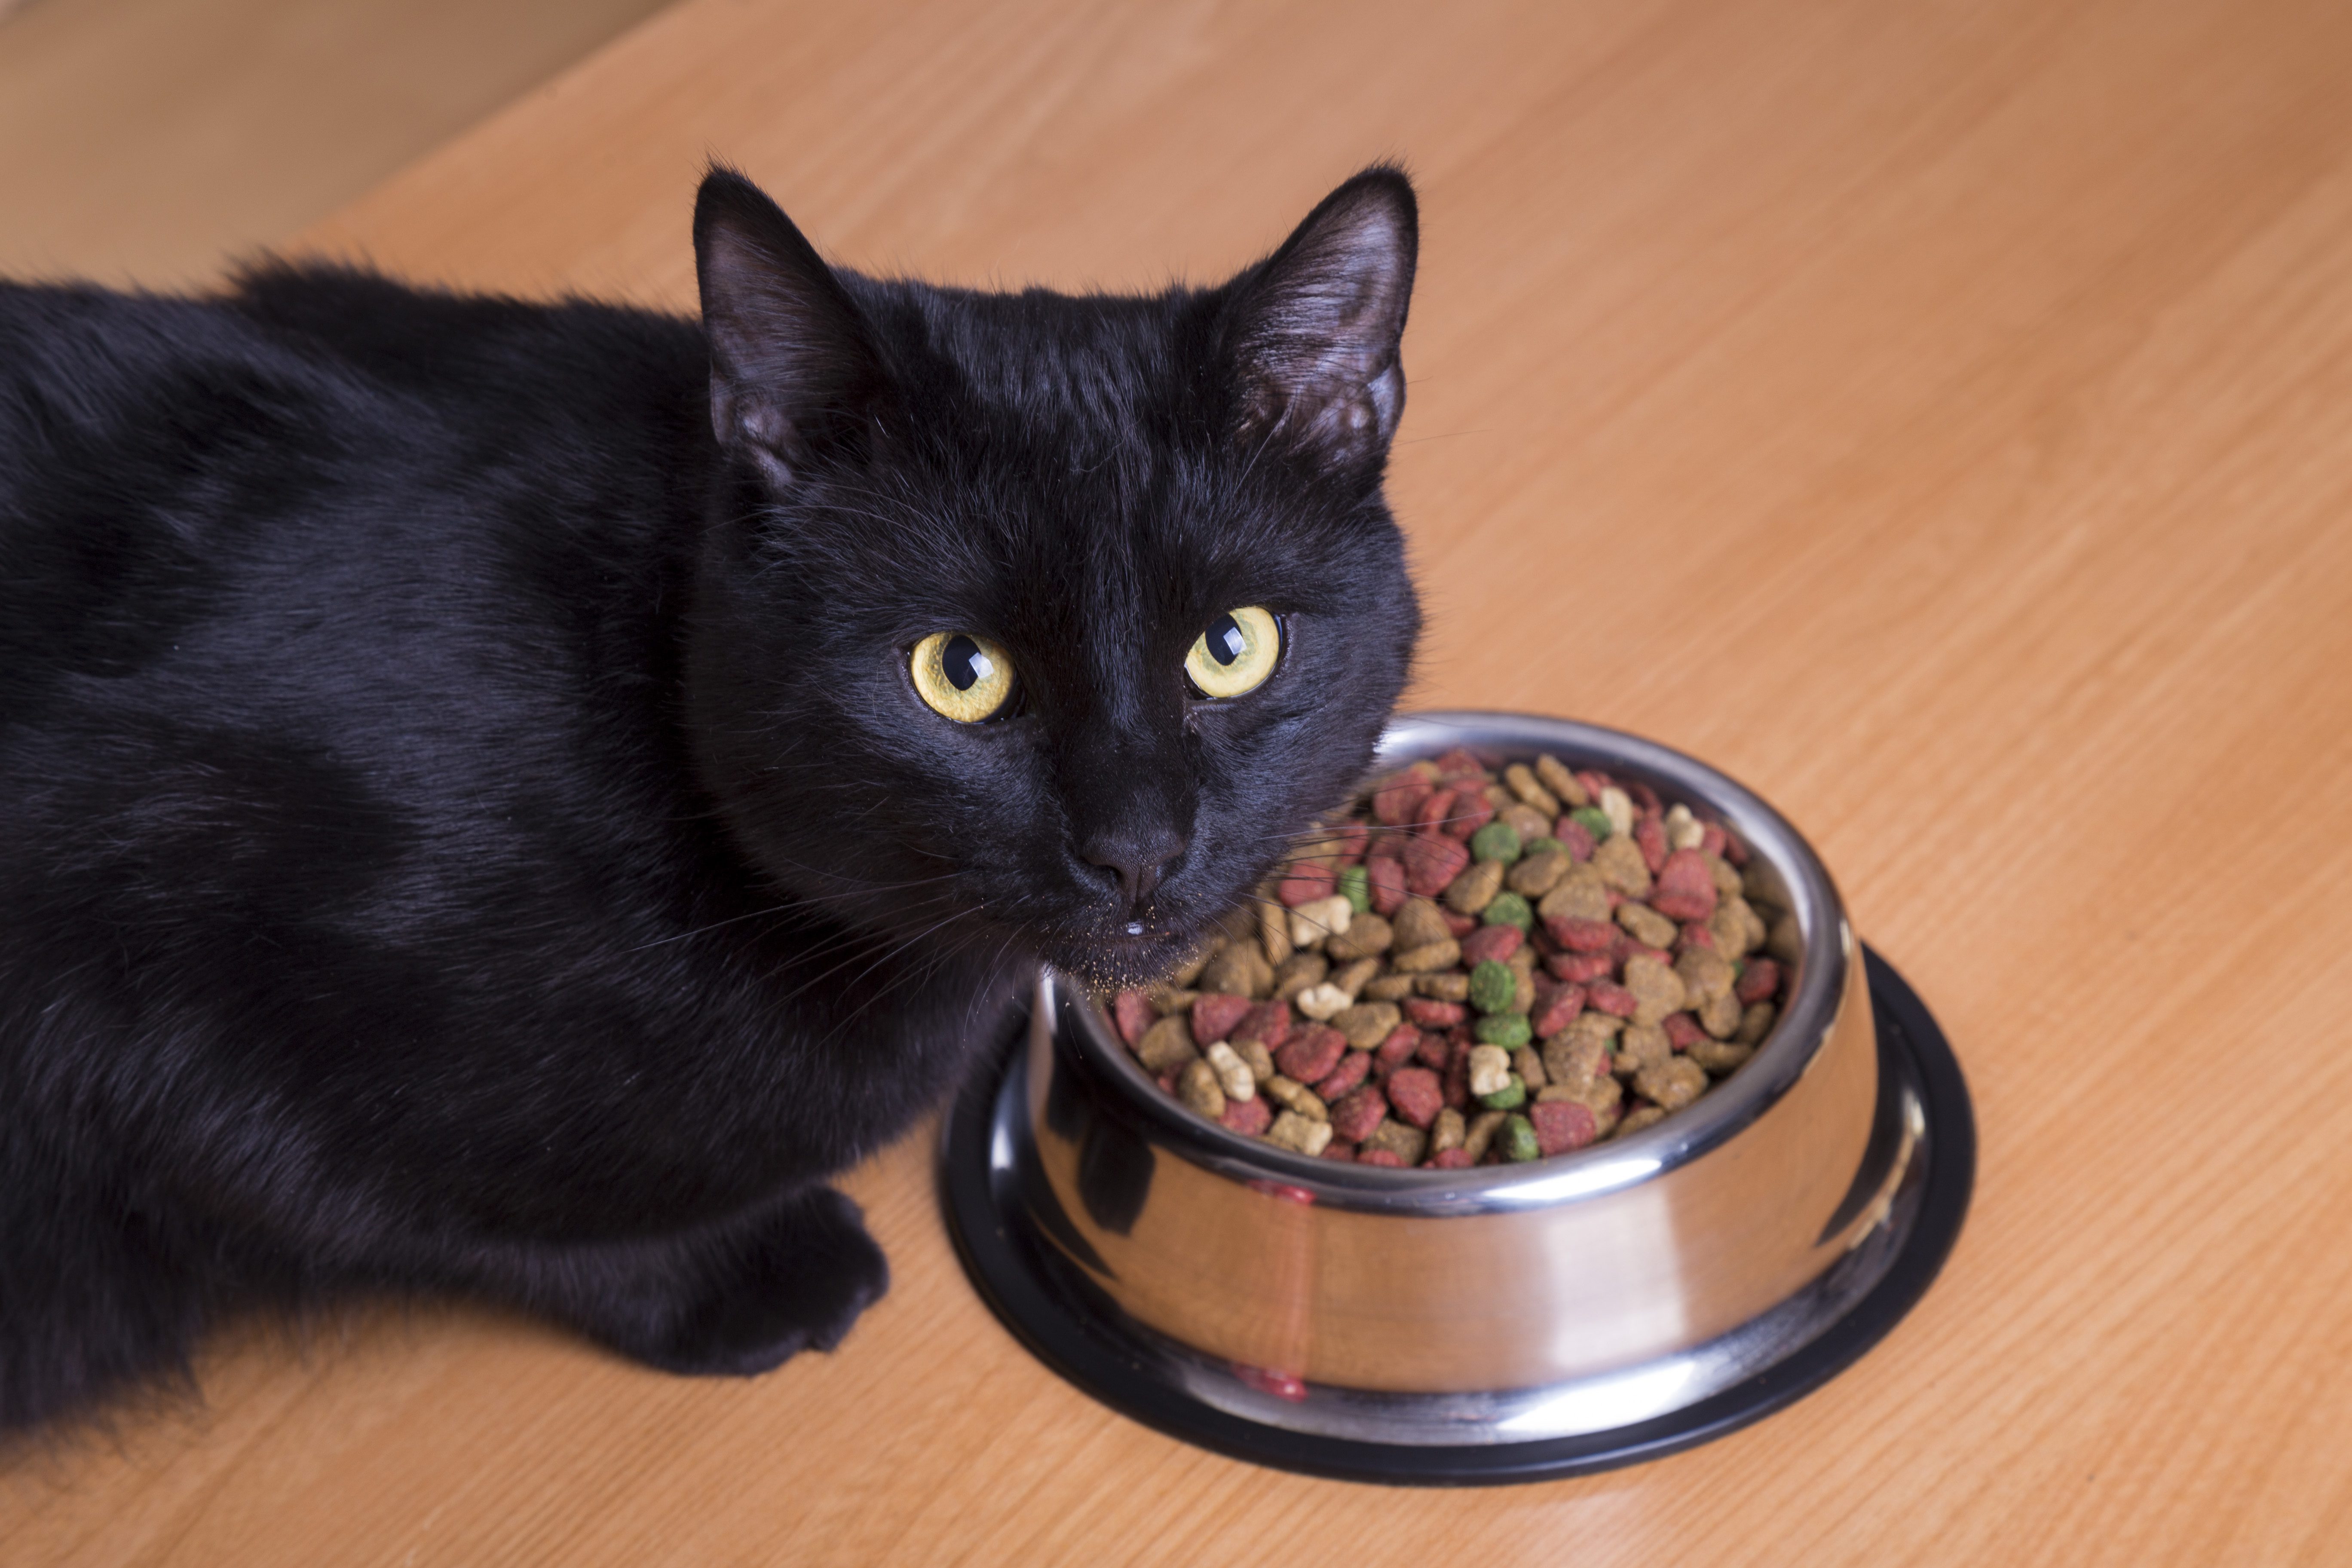 How to feed your cat dry food